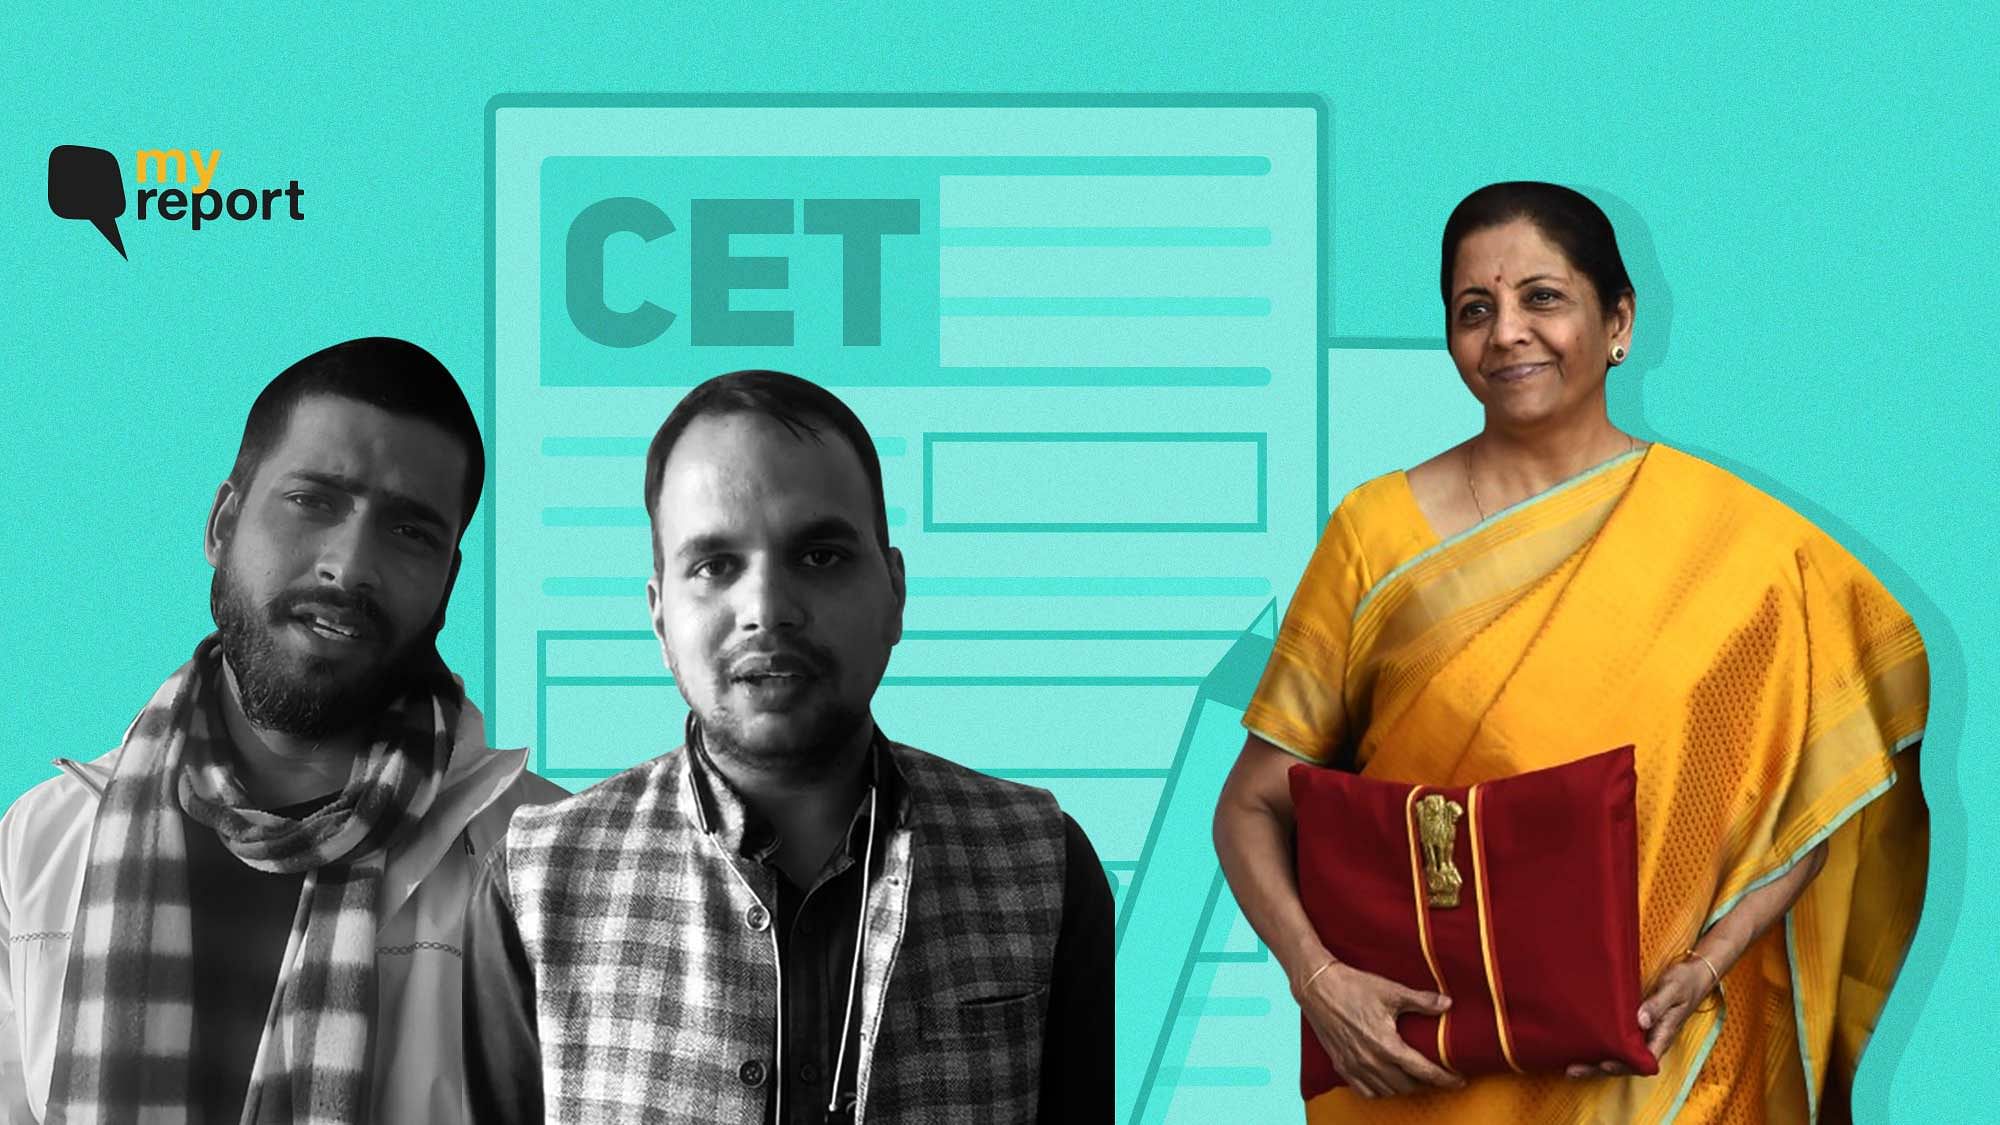 Aspirants weigh in on the new Common Eligibility Test for non-gazetted posts announced in the Budget.&nbsp;